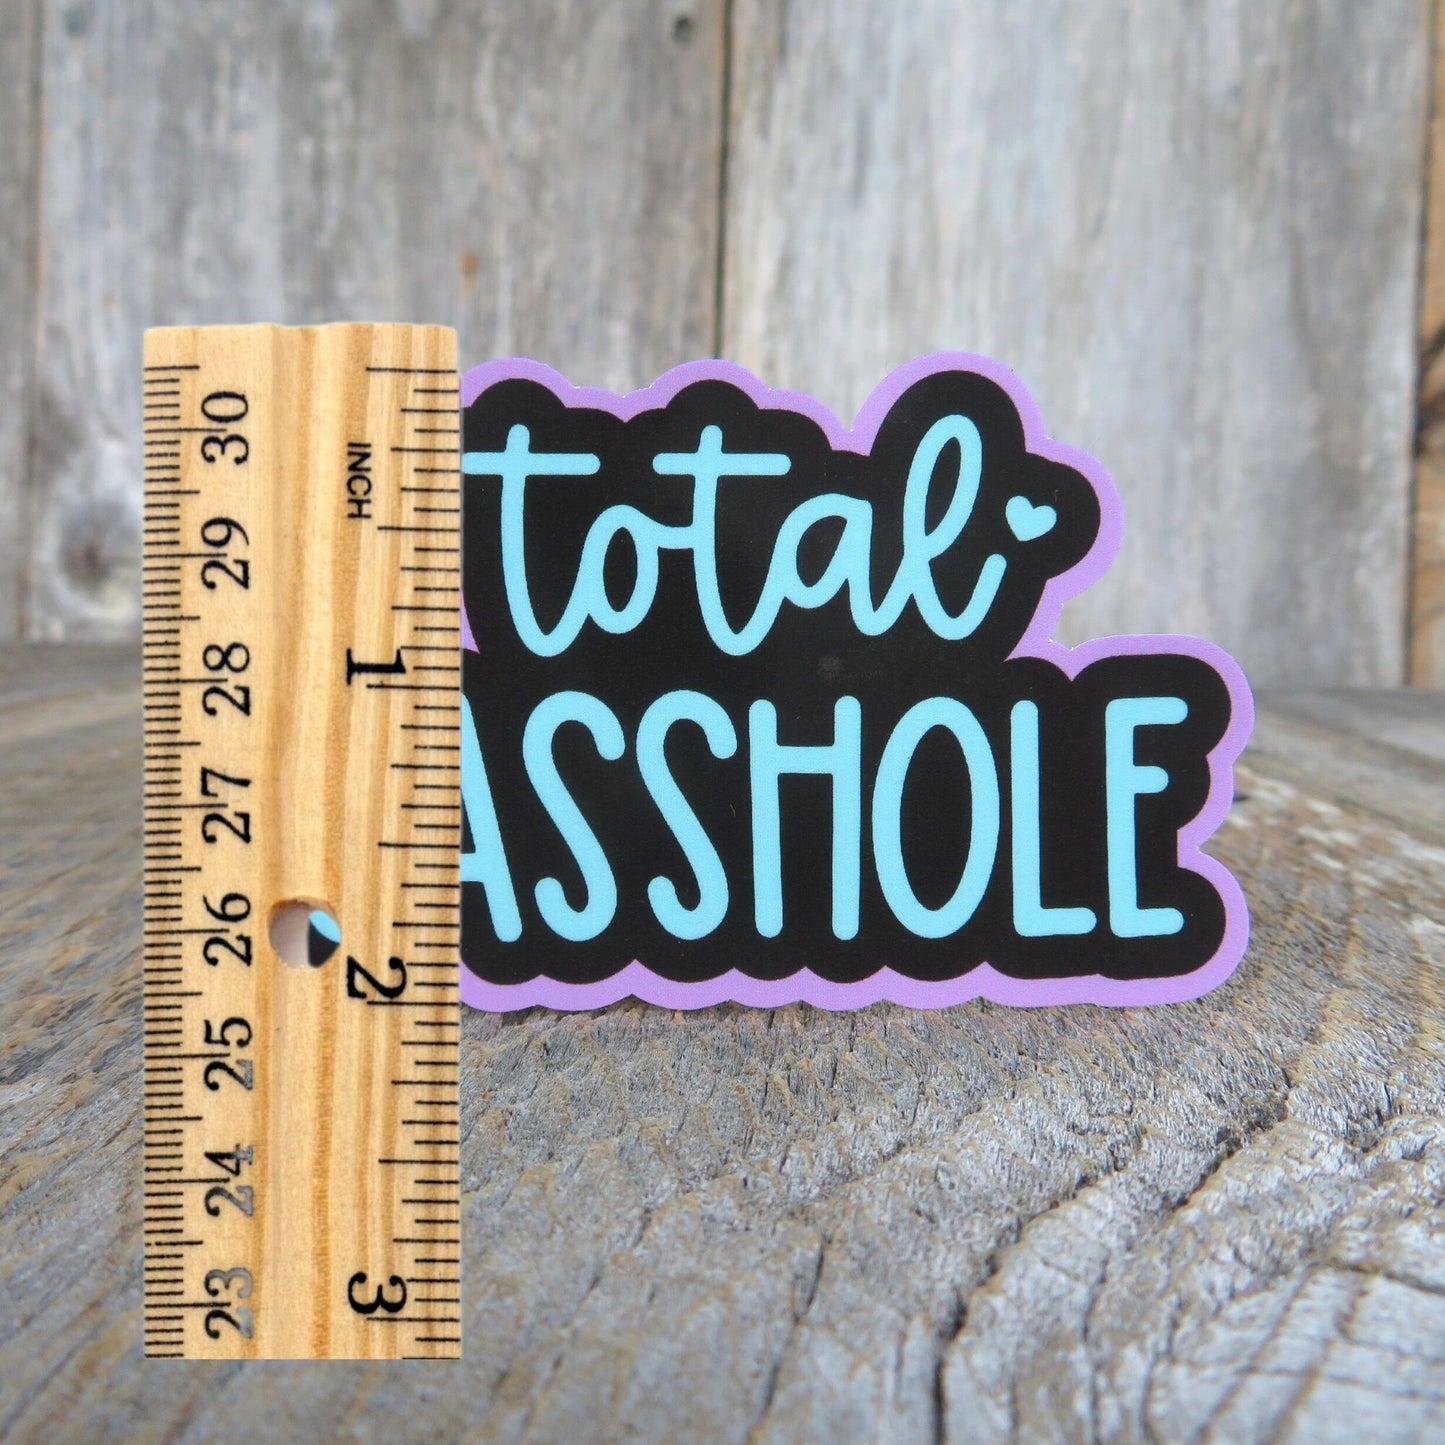 Total Sasshole Sticker Sassy People Full Color Social Outspoken Sarcastic Phrase Stickers